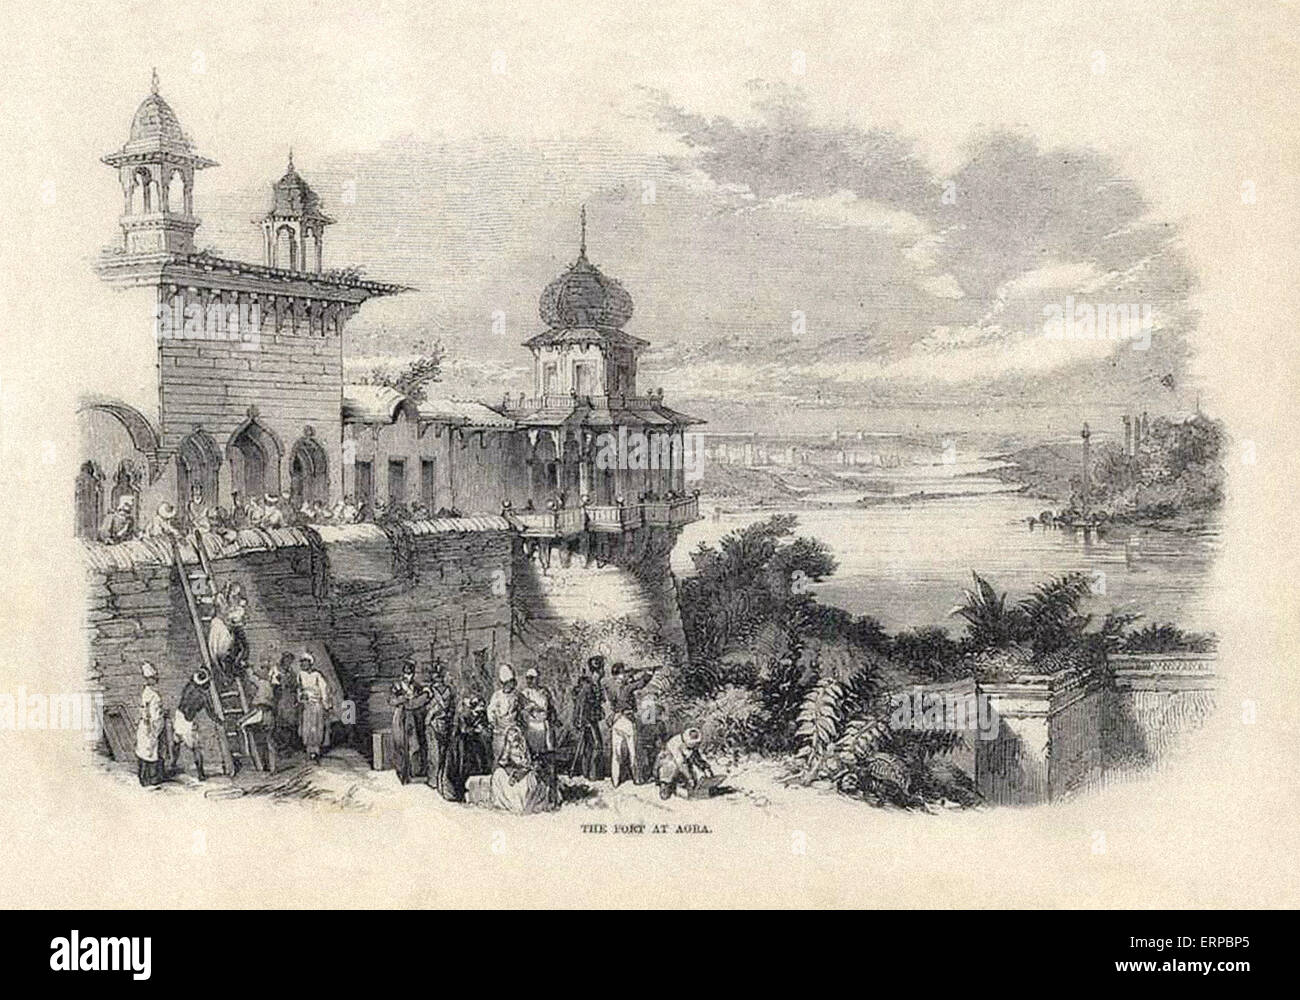 'The Fort at Agra' illustration showing British civilians fleeing from the rebels, Illustrated London News, 1857. Stock Photo